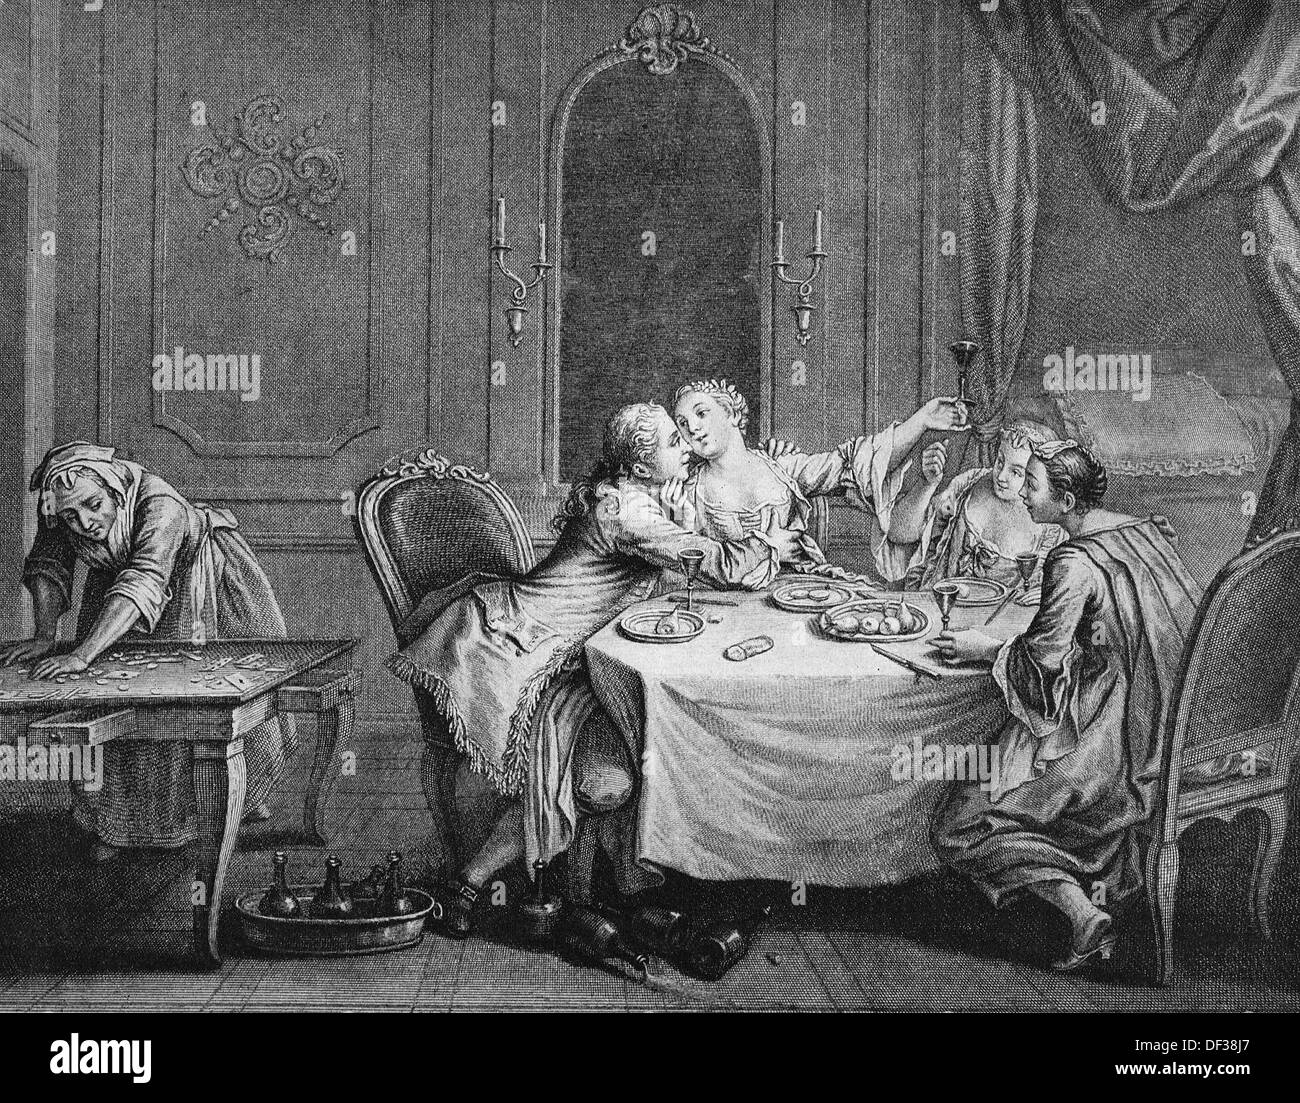 Gallant supper in a Petite Maison, French copper engraving, 1850 Stock Photo